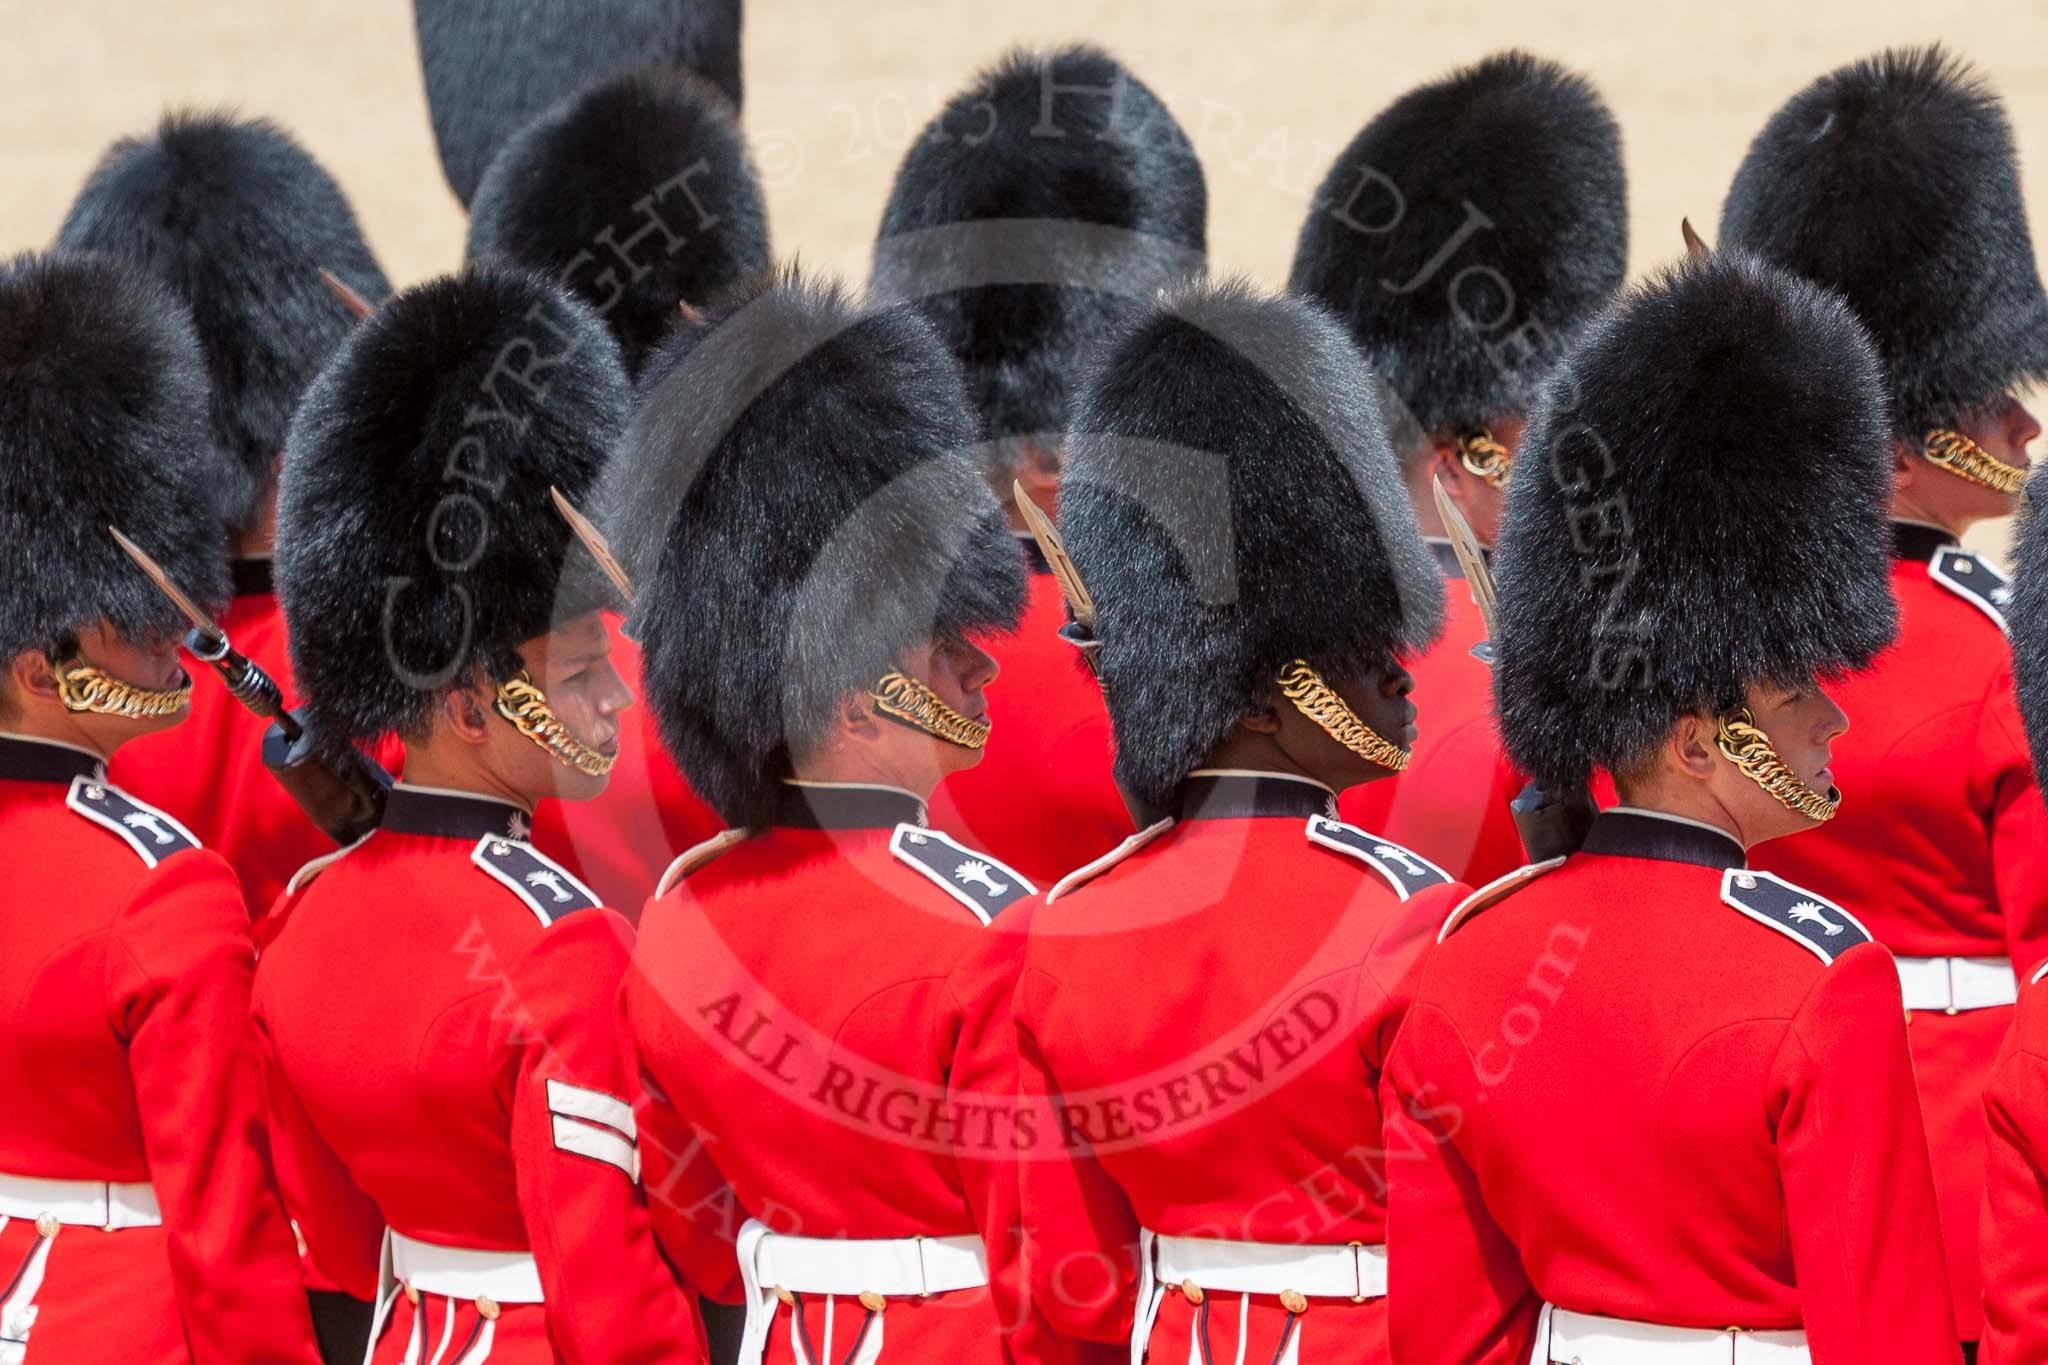 The Colonel's Review 2015.
Horse Guards Parade, Westminster,
London,

United Kingdom,
on 06 June 2015 at 11:35, image #383